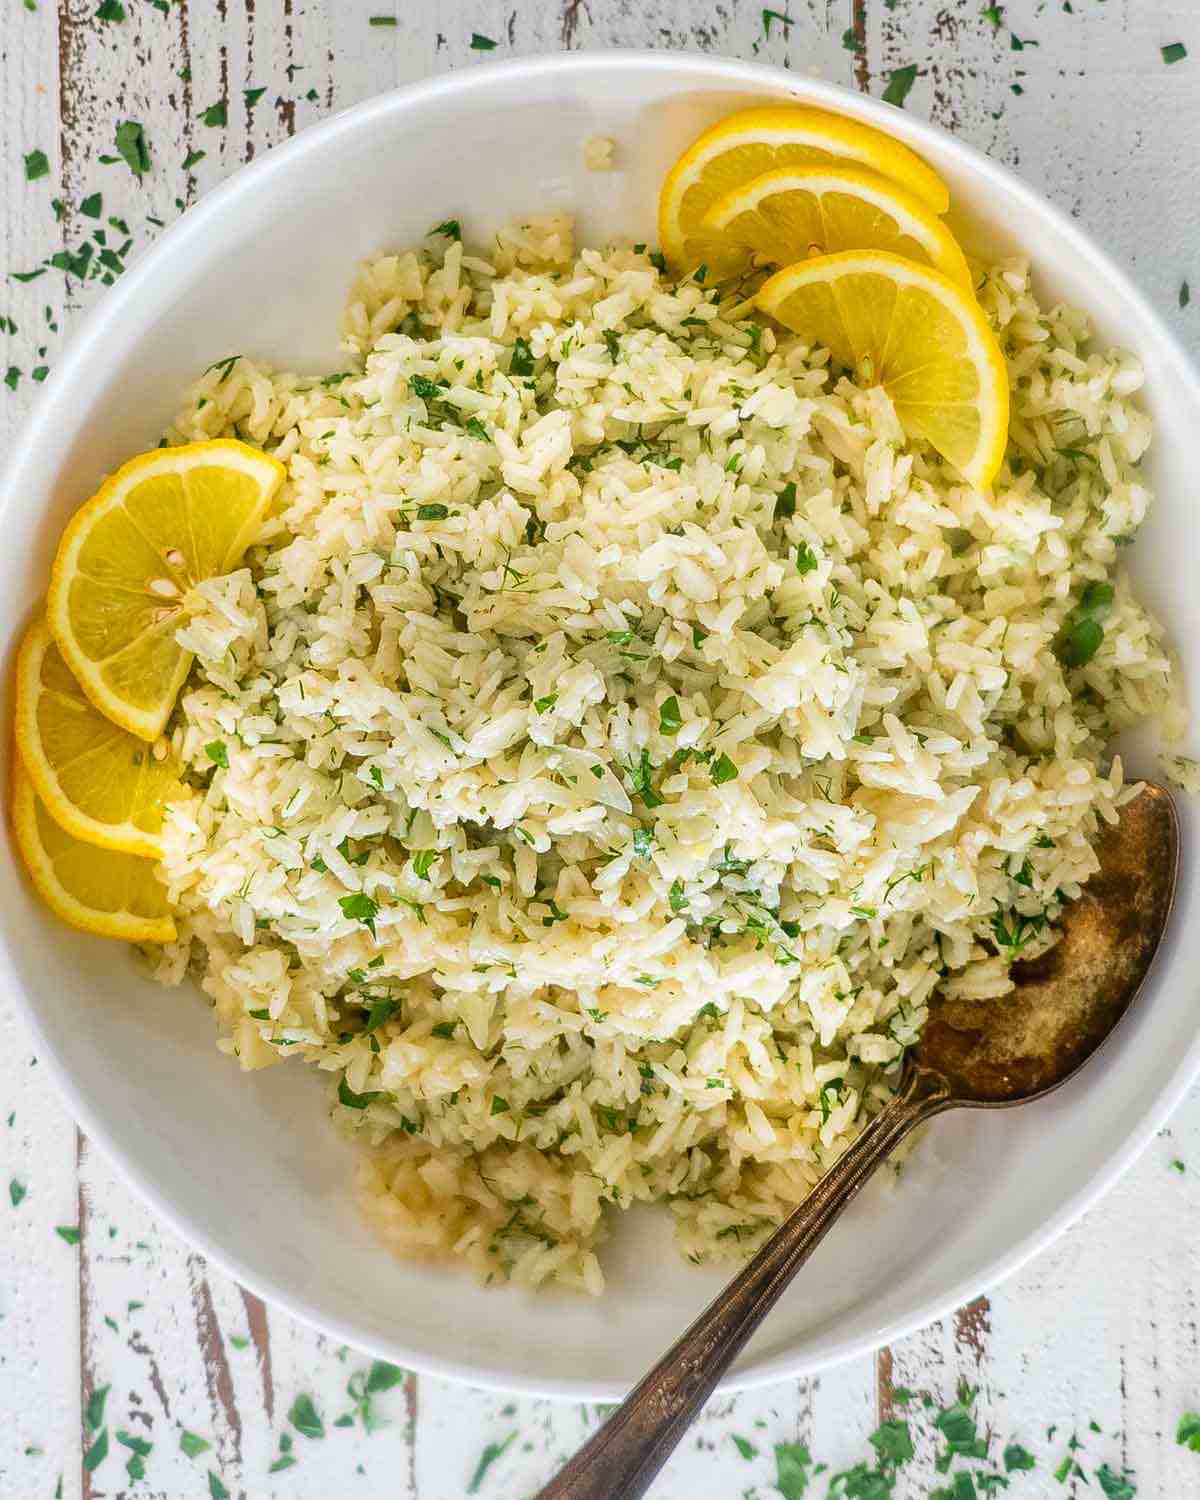 Rice and herbs in a bowl with lemons.